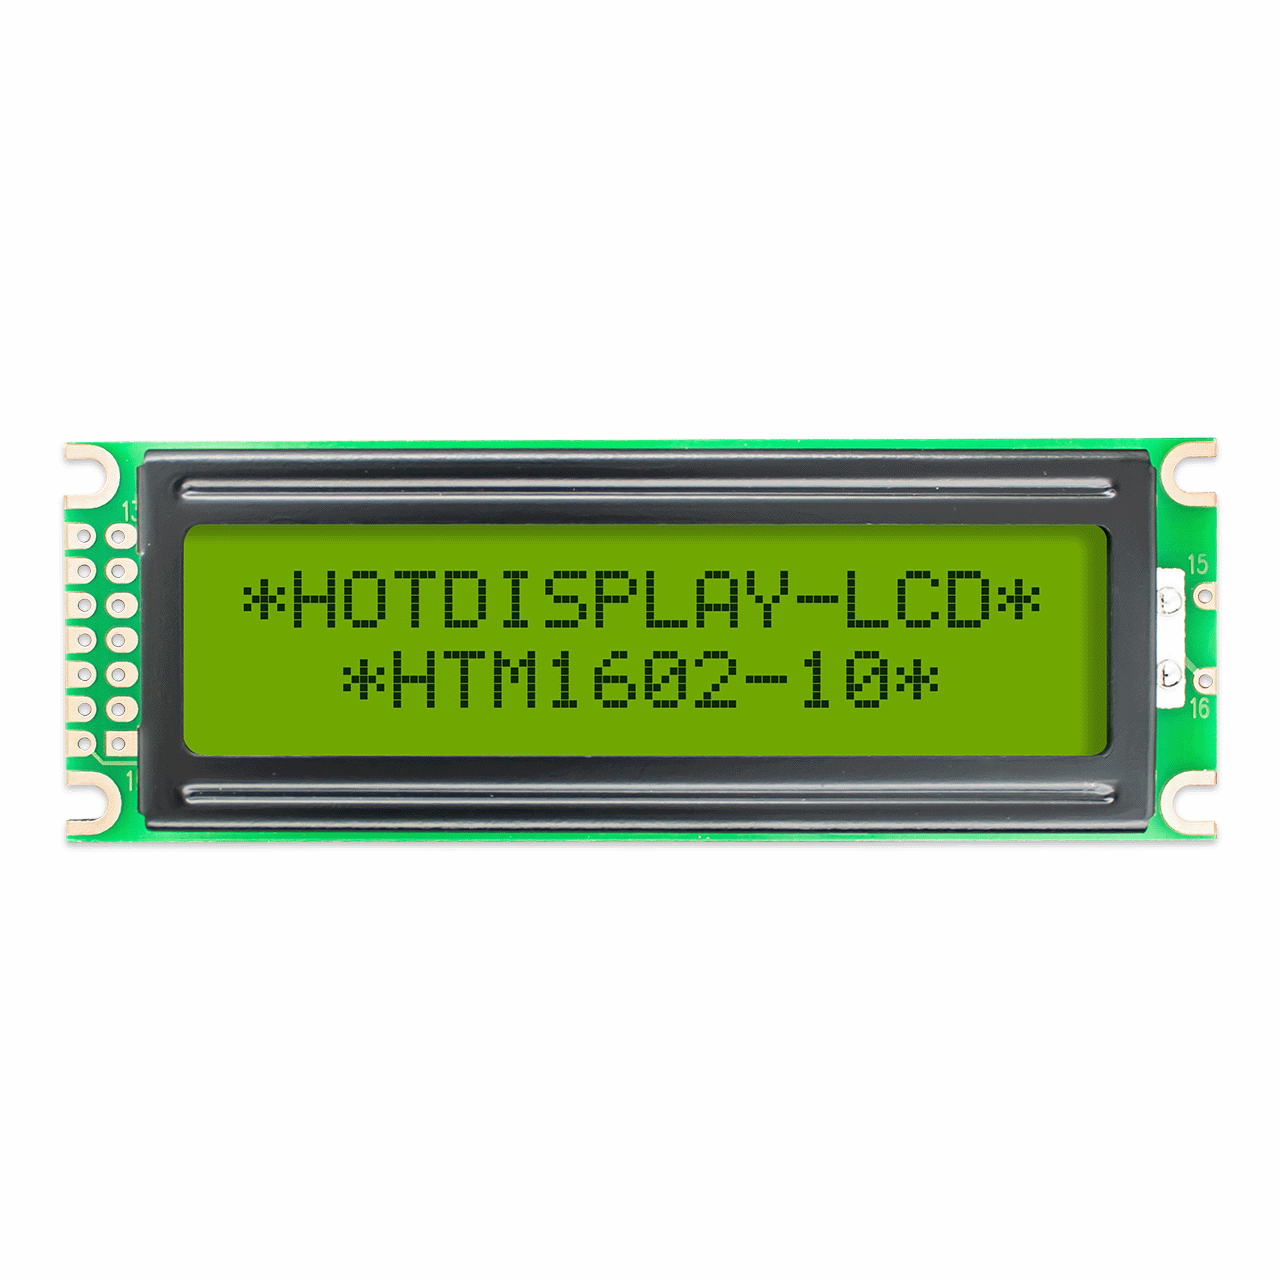 Arduino-Character LCD module | 2X16 STN+ Yellow/Green Display with Yellow/Green Backlight